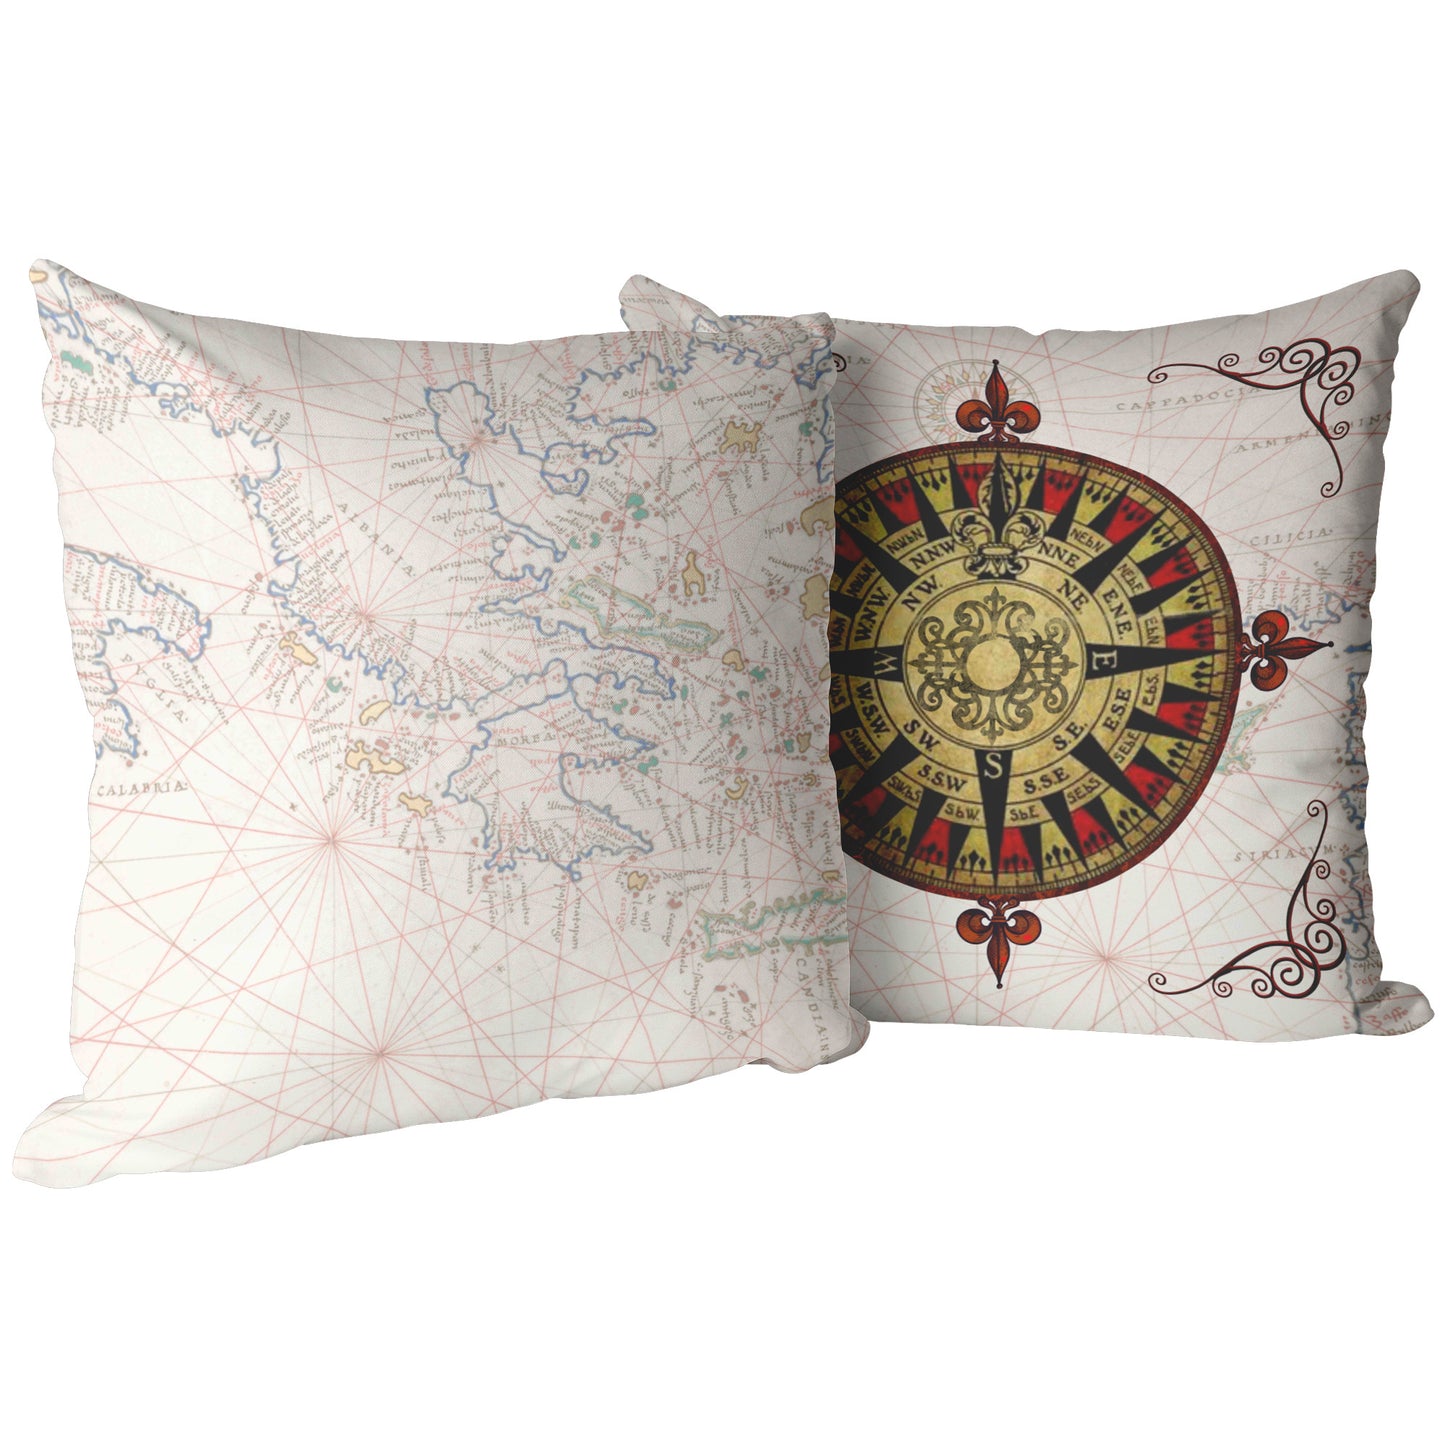 Compass Rose Throw Pillow - Red-Black